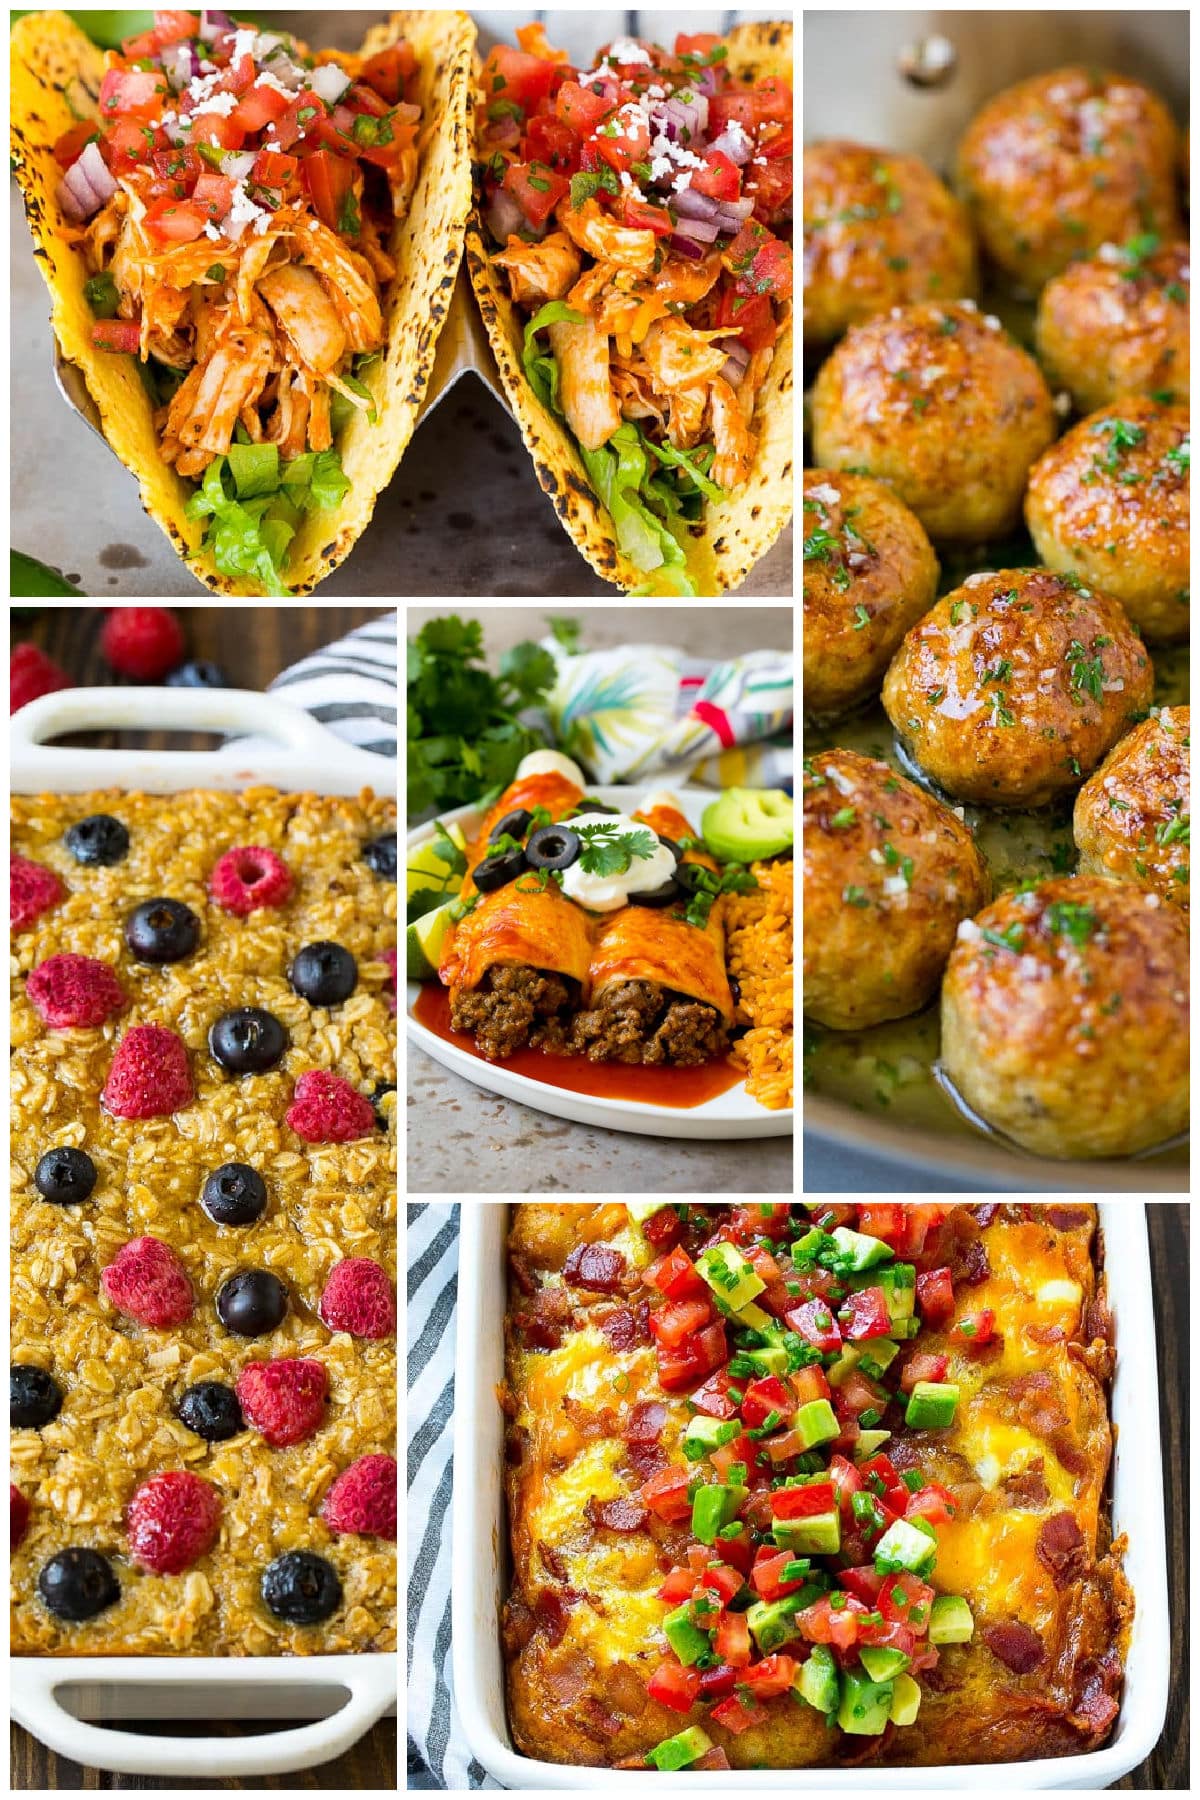 A collection of easy freezer meal recipes like chicken meatballs, beef enchiladas and chicken tinga.